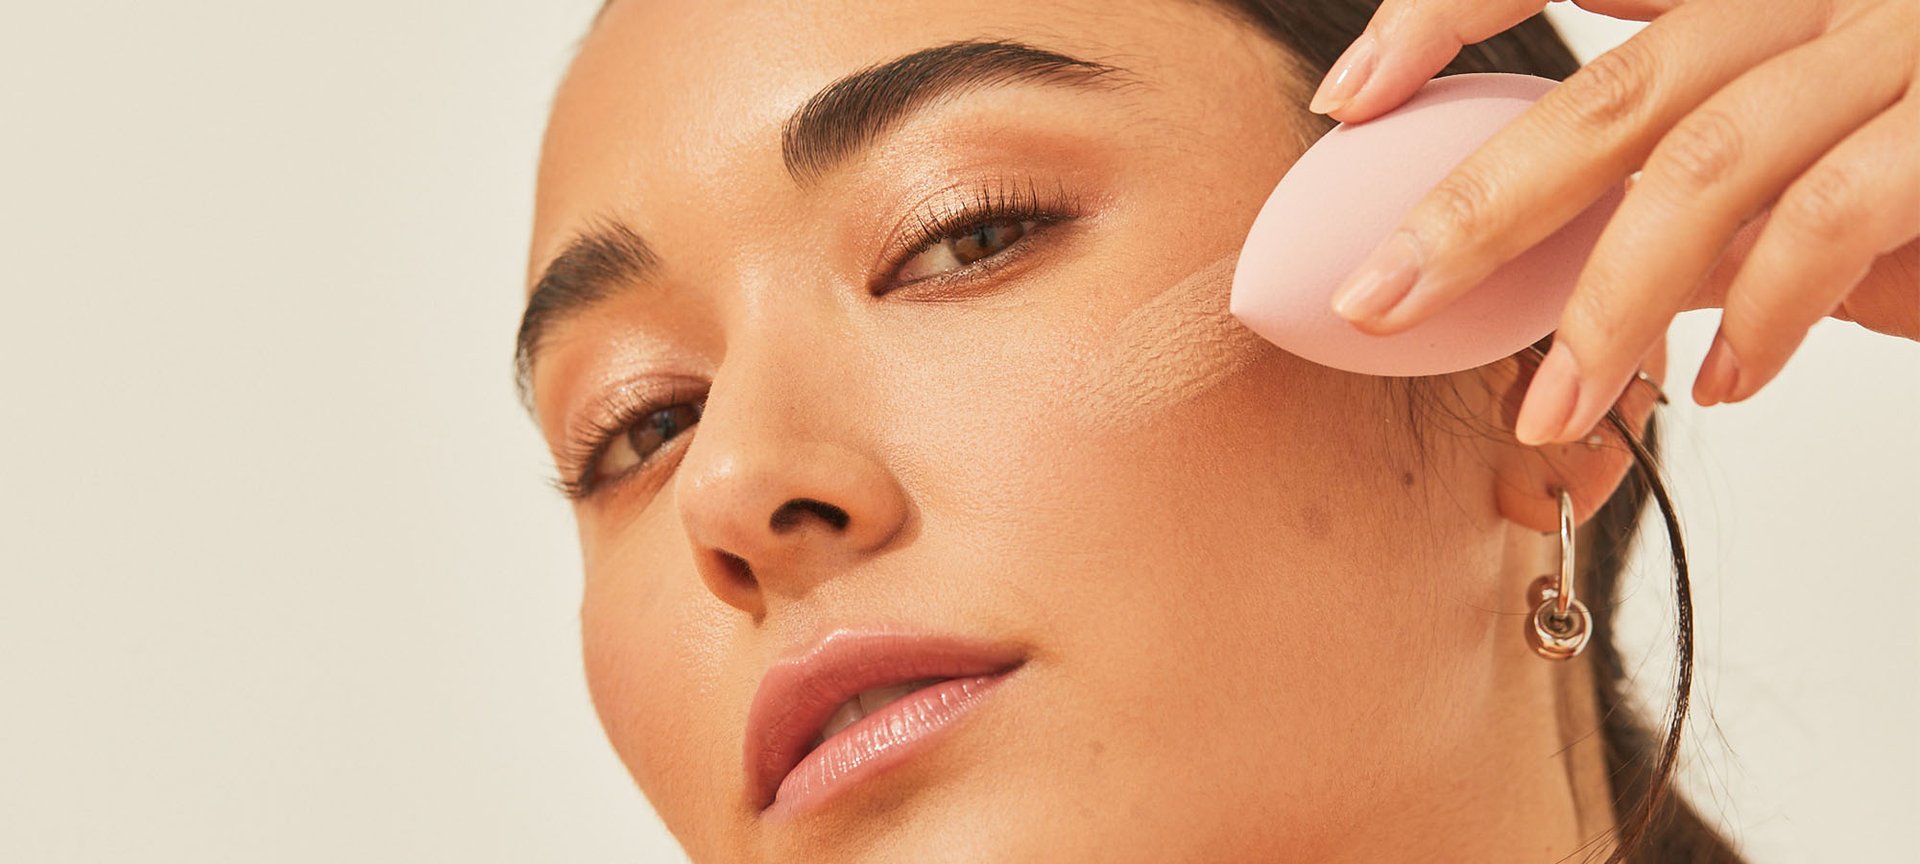 How to make your skin look smooth with makeup in 5 simple steps